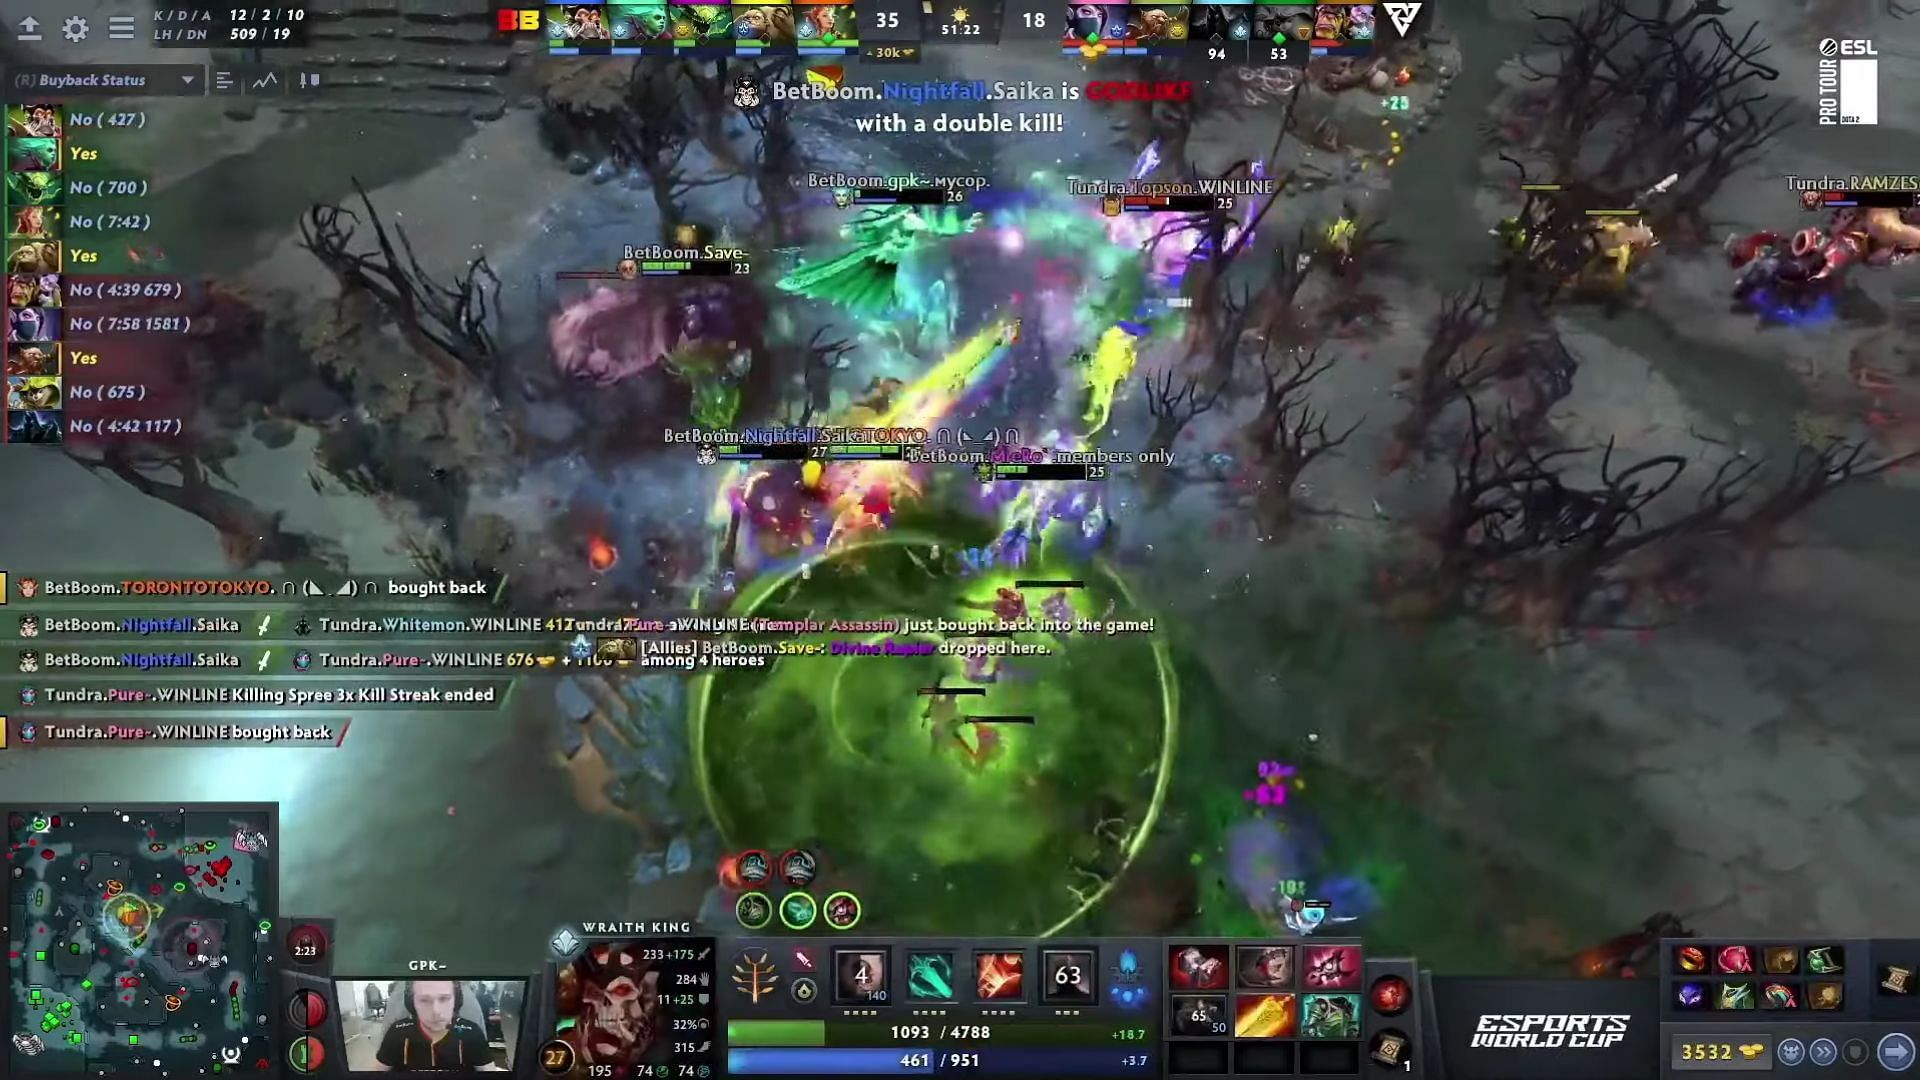 This last teamfight sealed the deal for Tundra (Image via ESL One Dota 2/YT)